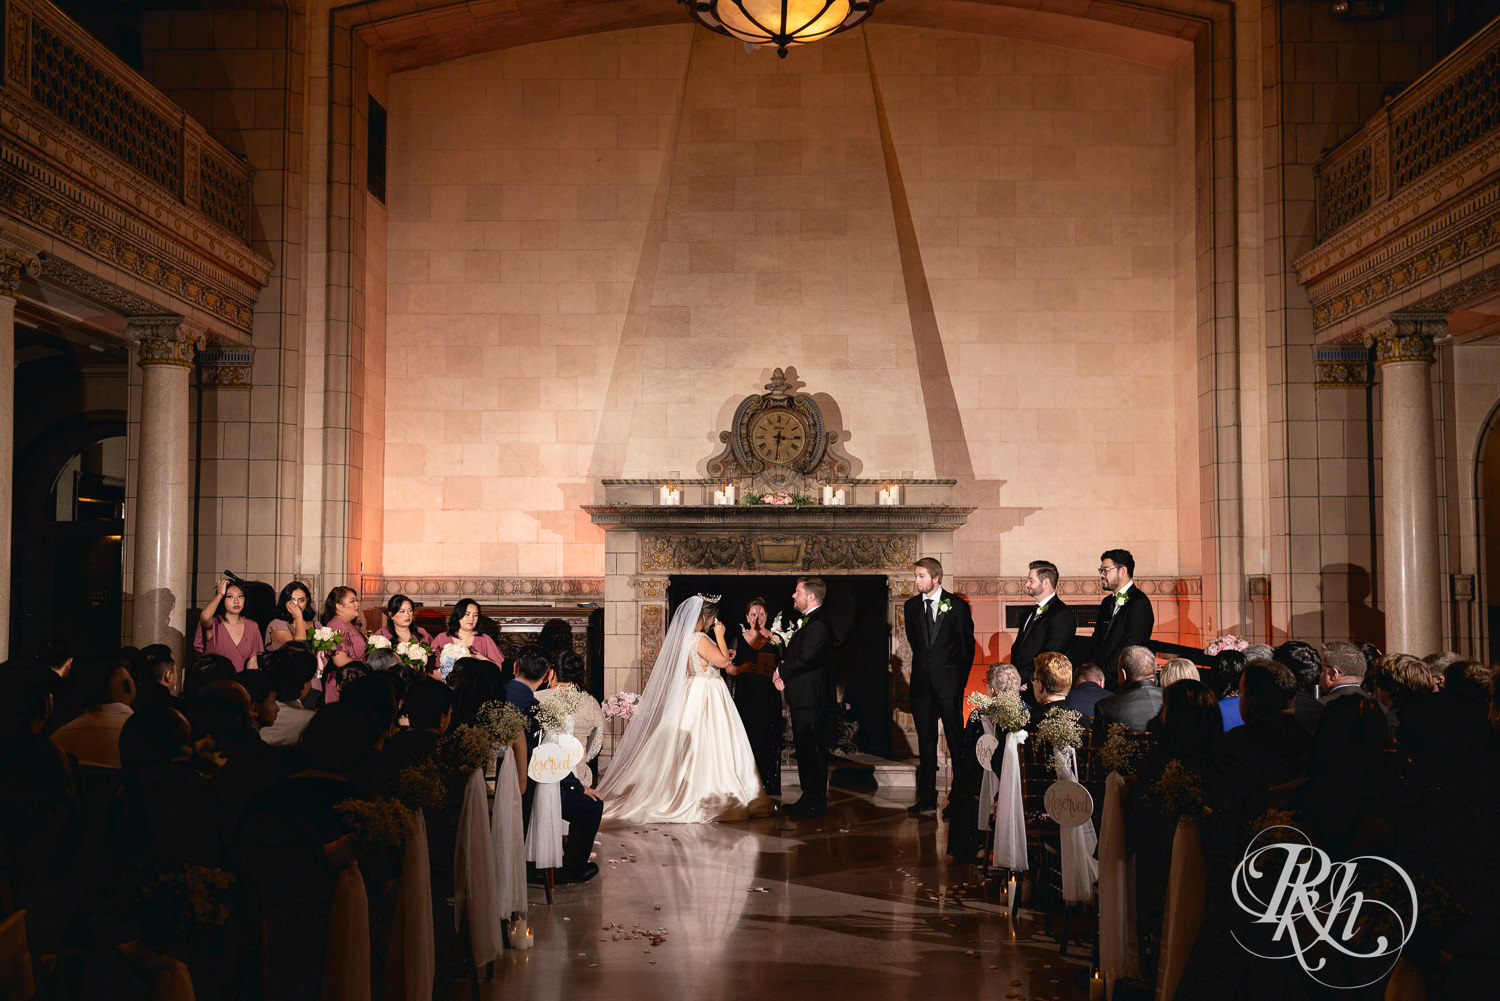 Hmong bride and groom hold hands during wedding ceremony at the Saint Paul Athletic Club in Saint Paul, Minnesota.